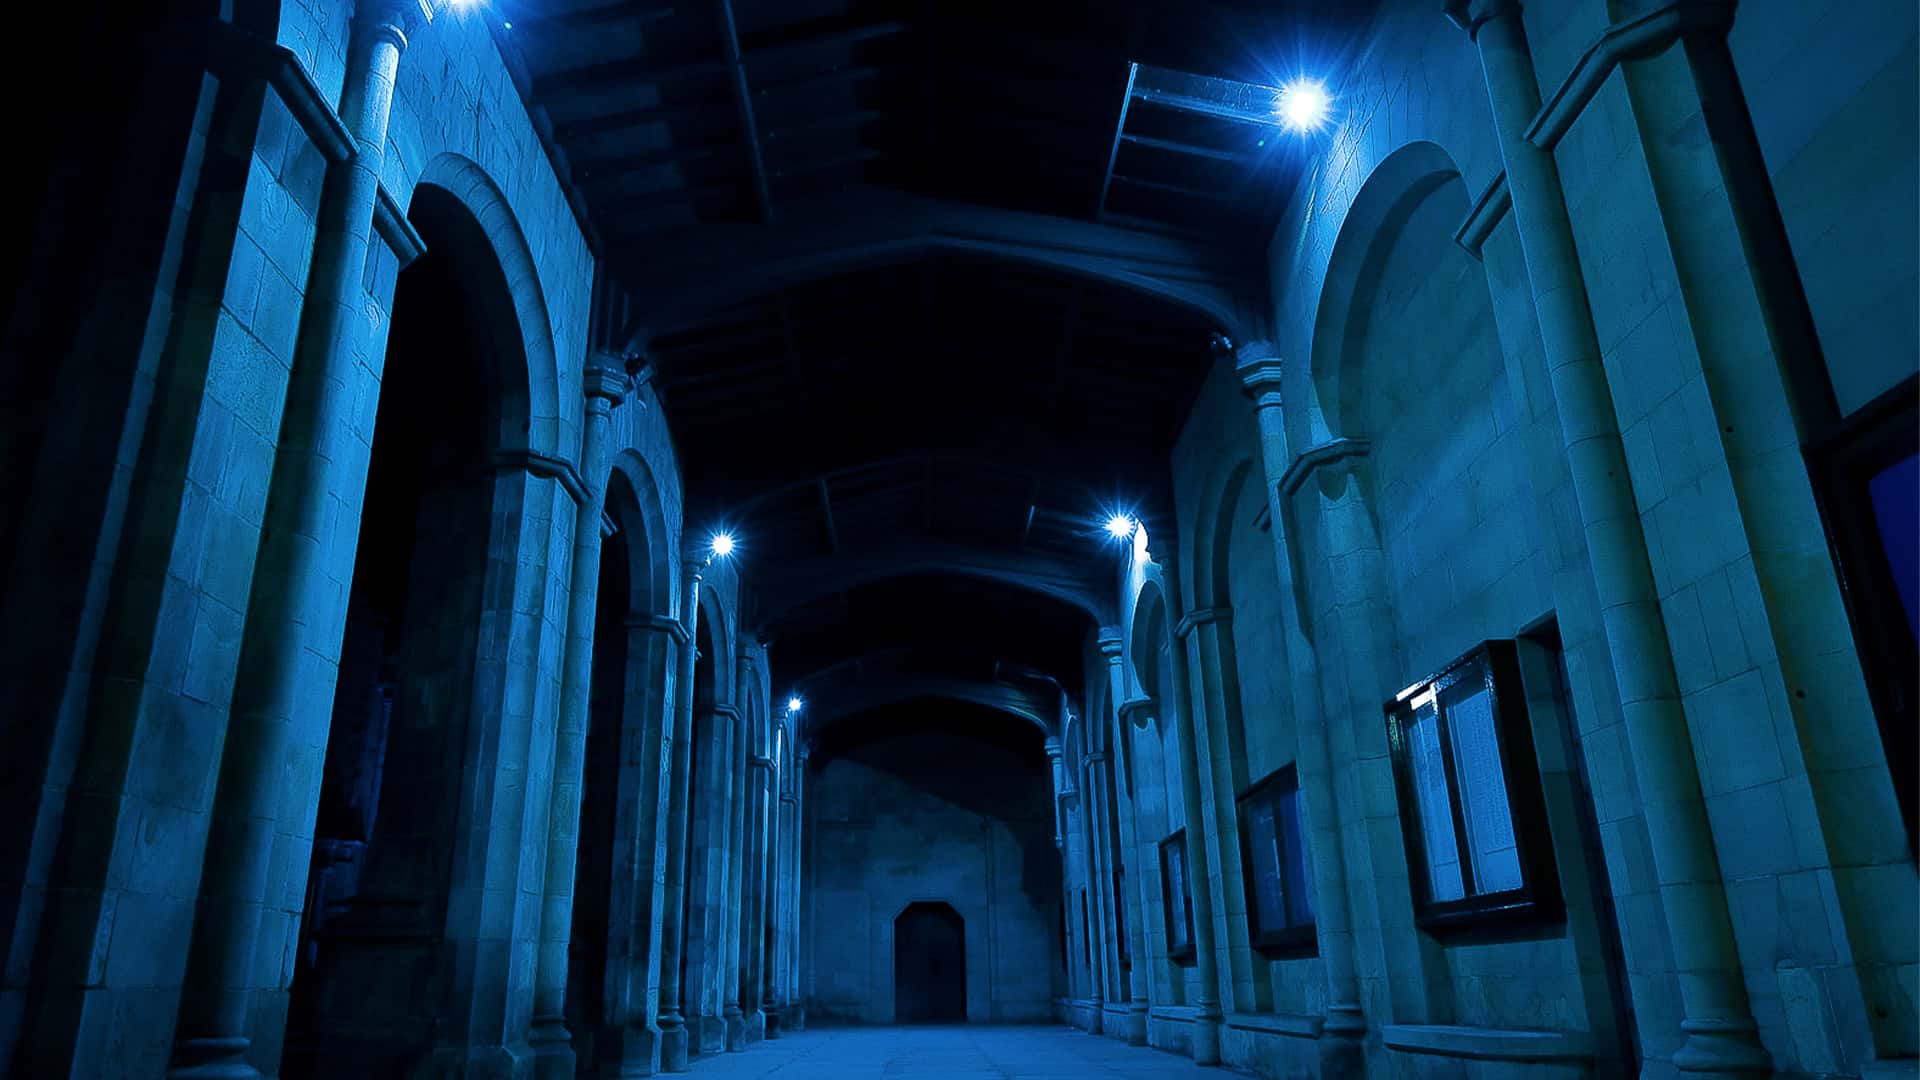 St Salvator's Chapel with blue lights